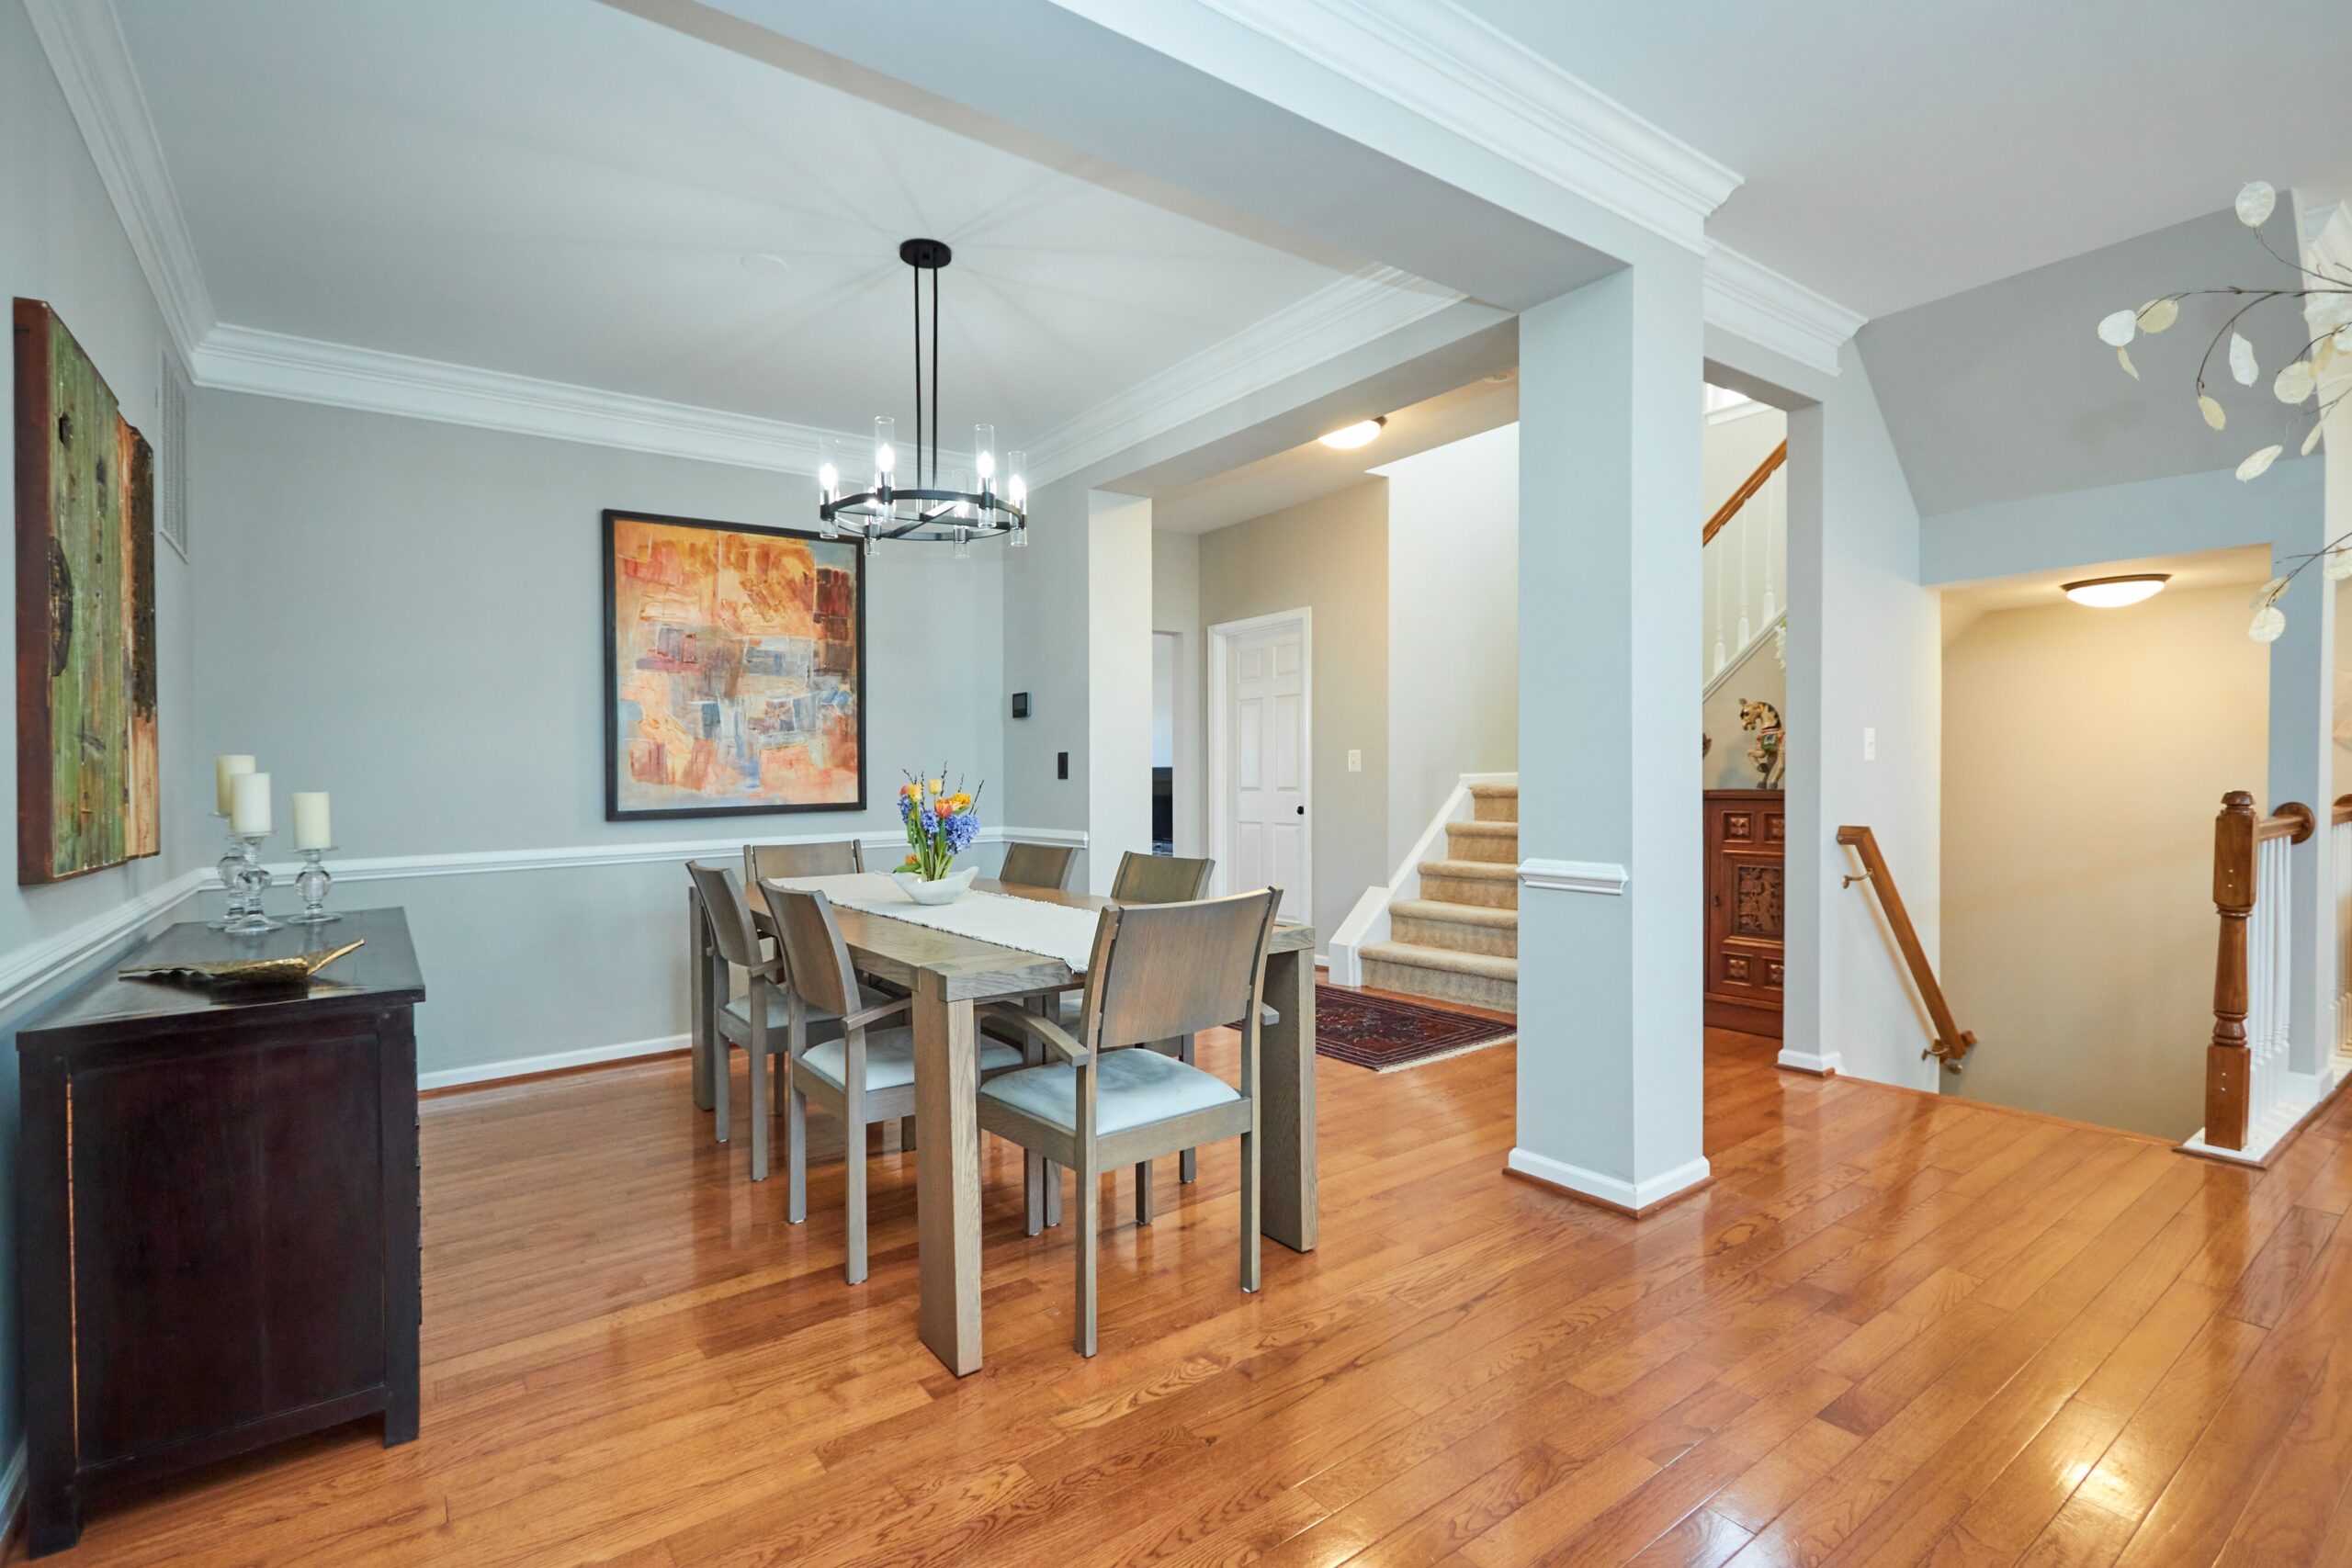 Professional interior photo of 25499 Beresford Drive, Chantilly, Virginia - showing the dining room on the main level with hardwood floors and staircase leading to the top and to the bottom floors